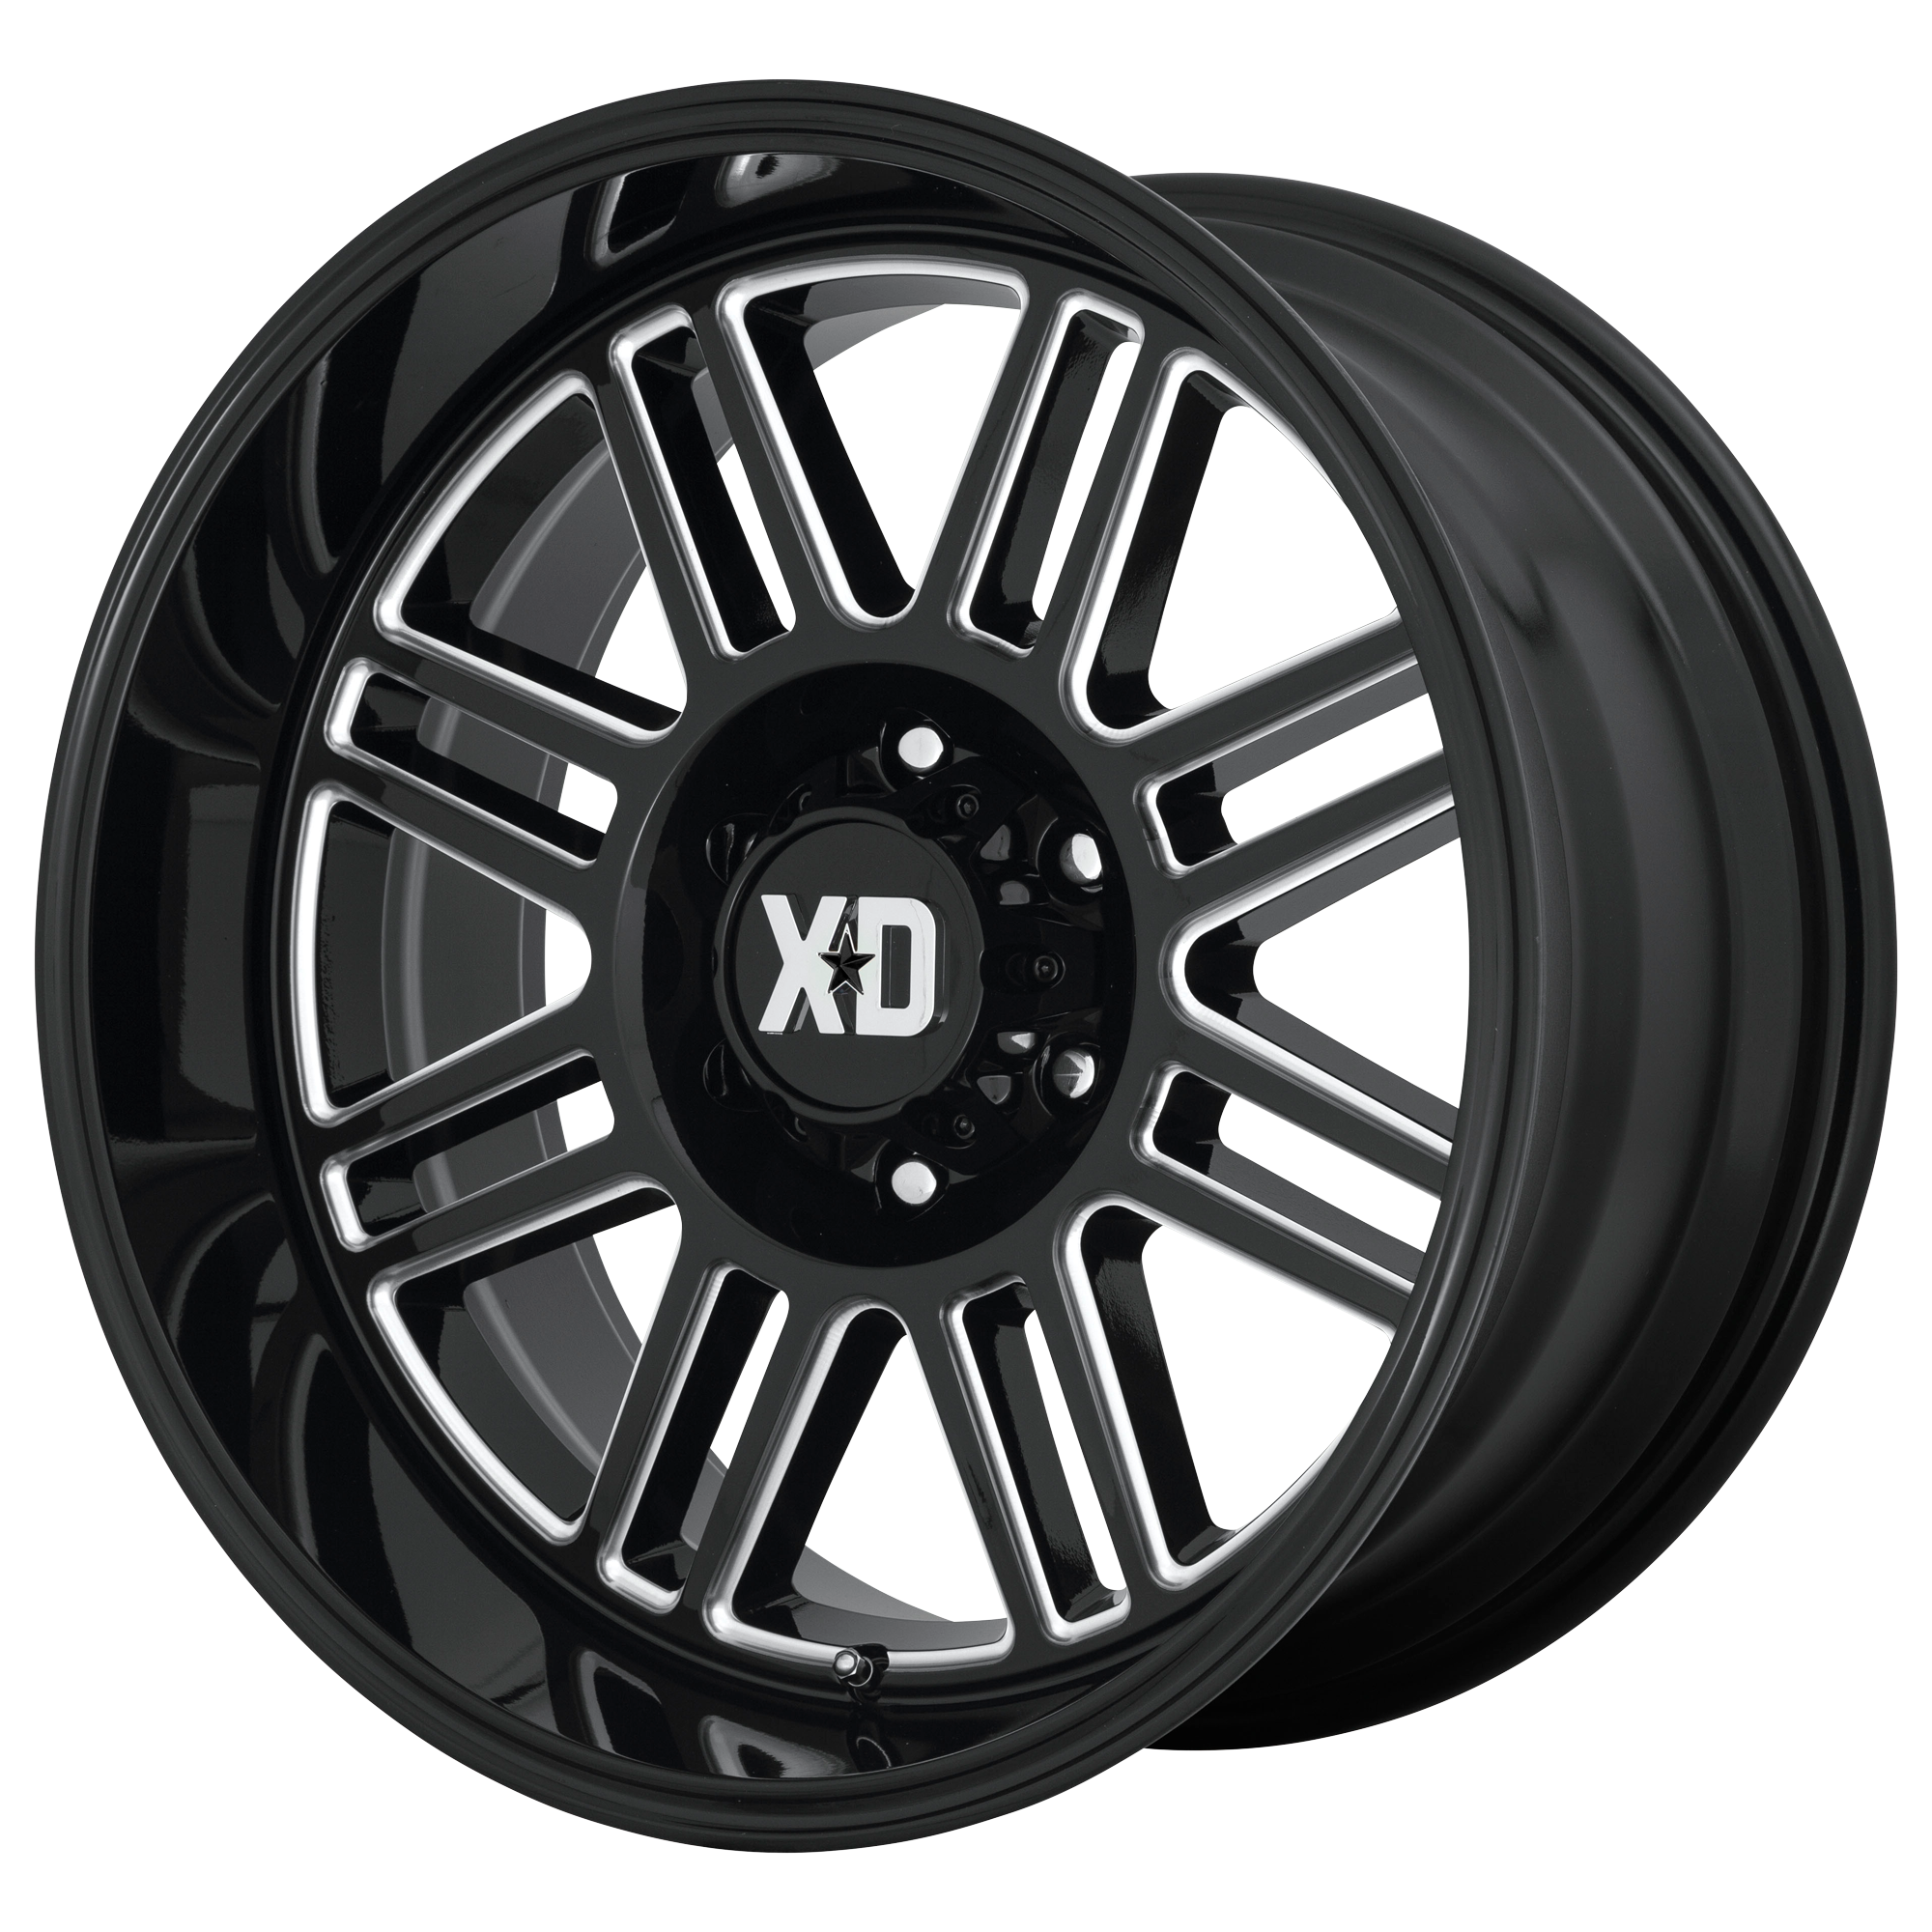 CAGE 20x9 6x135.00 GLOSS BLACK MILLED (18 mm) - Tires and Engine Performance